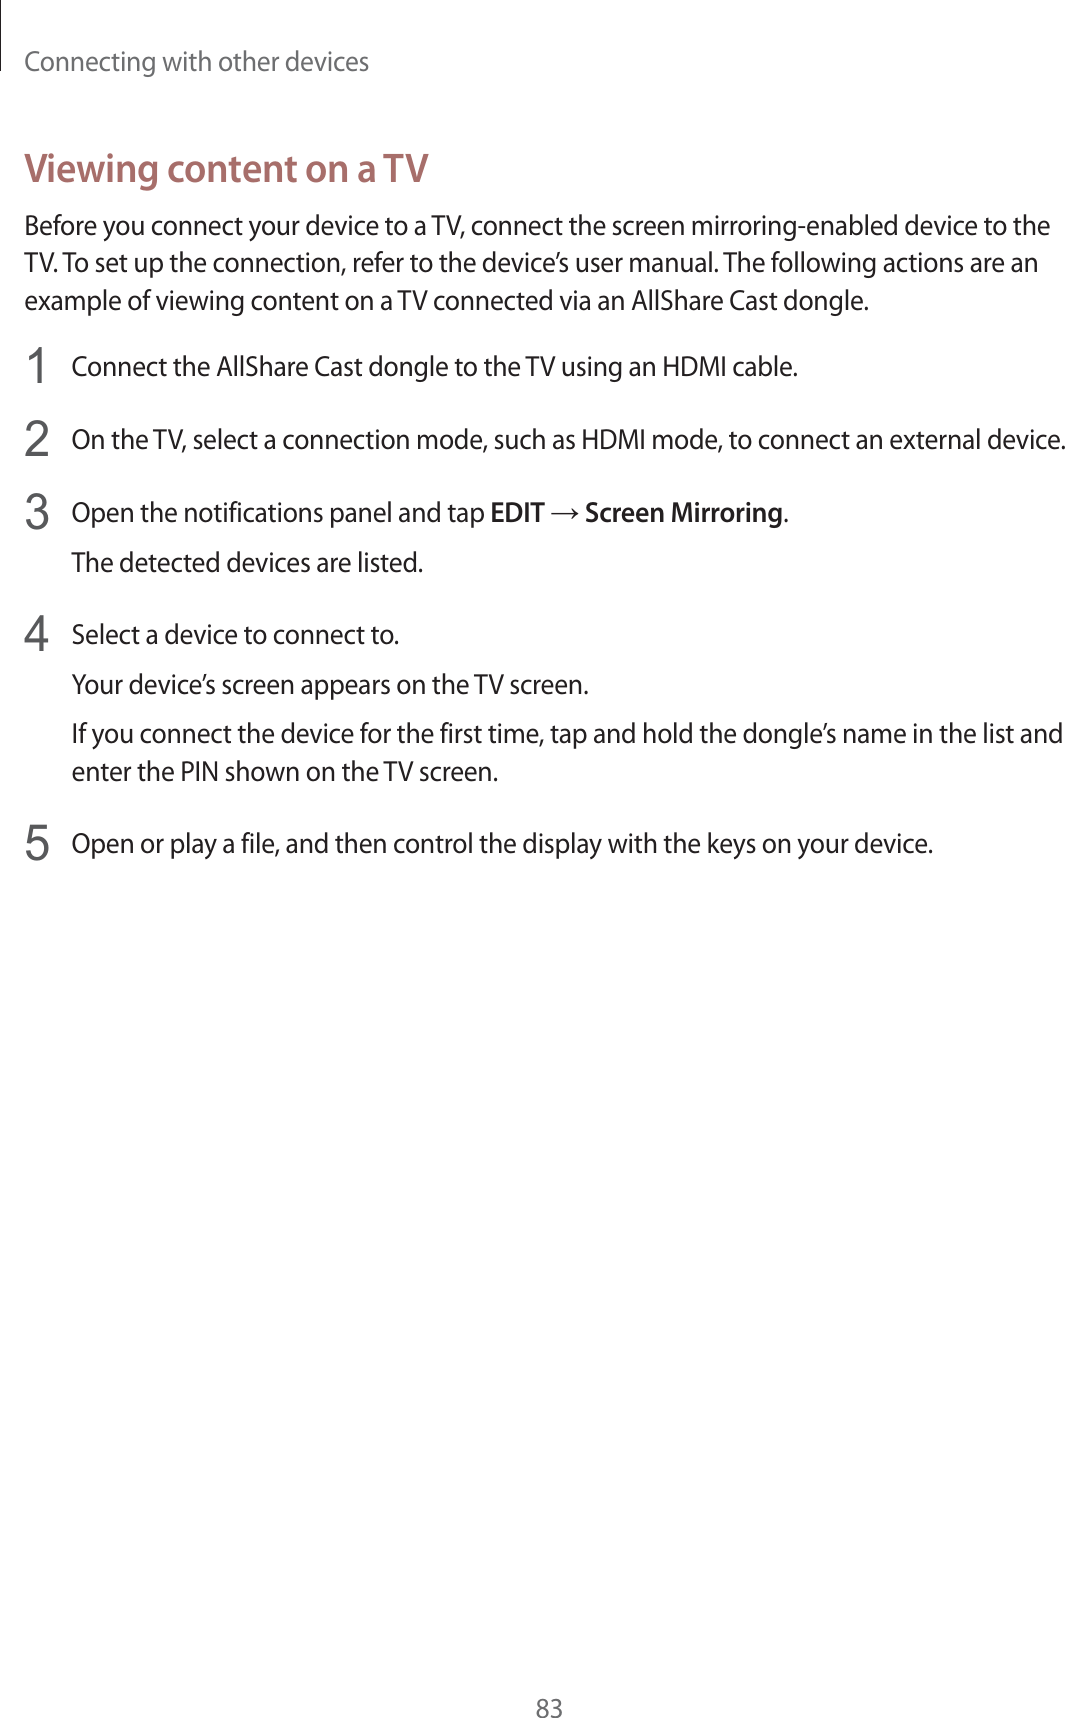 Connecting with other devices83Viewing content on a TVBefore you connect your device to a TV, connect the screen mirroring-enabled device to the TV. To set up the connection, refer to the device’s user manual. The following actions are an example of viewing content on a TV connected via an AllShare Cast dongle.1Connect the AllShare Cast dongle to the TV using an HDMI cable.2On the TV, select a connection mode, such as HDMI mode, to connect an external device.3Open the notifications panel and tap EDIT ĺ Screen Mirroring.The detected devices are listed.4Select a device to connect to.Your device’s screen appears on the TV screen.If you connect the device for the first time, tap and hold the dongle’s name in the list and enter the PIN shown on the TV screen.5Open or play a file, and then control the display with the keys on your device.